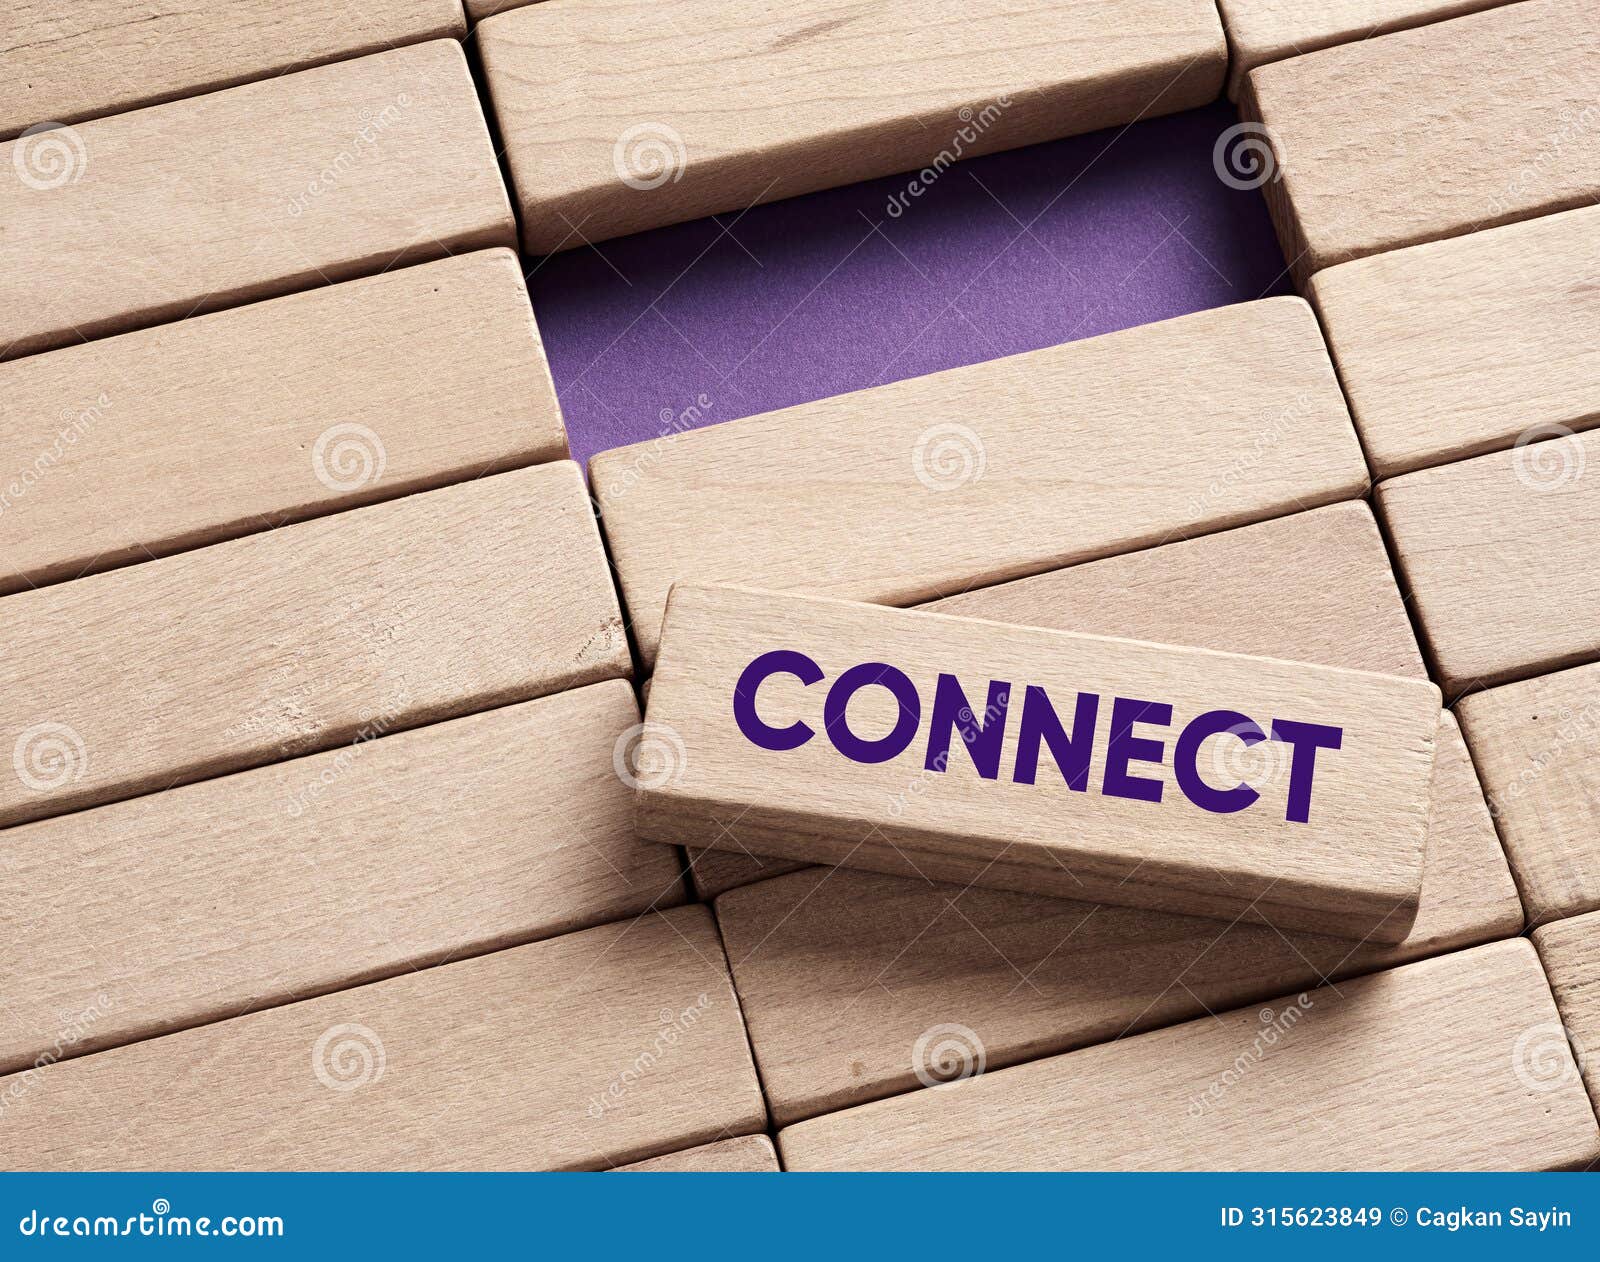 the word connect on wooden blocks. making a connection and bridging the gap